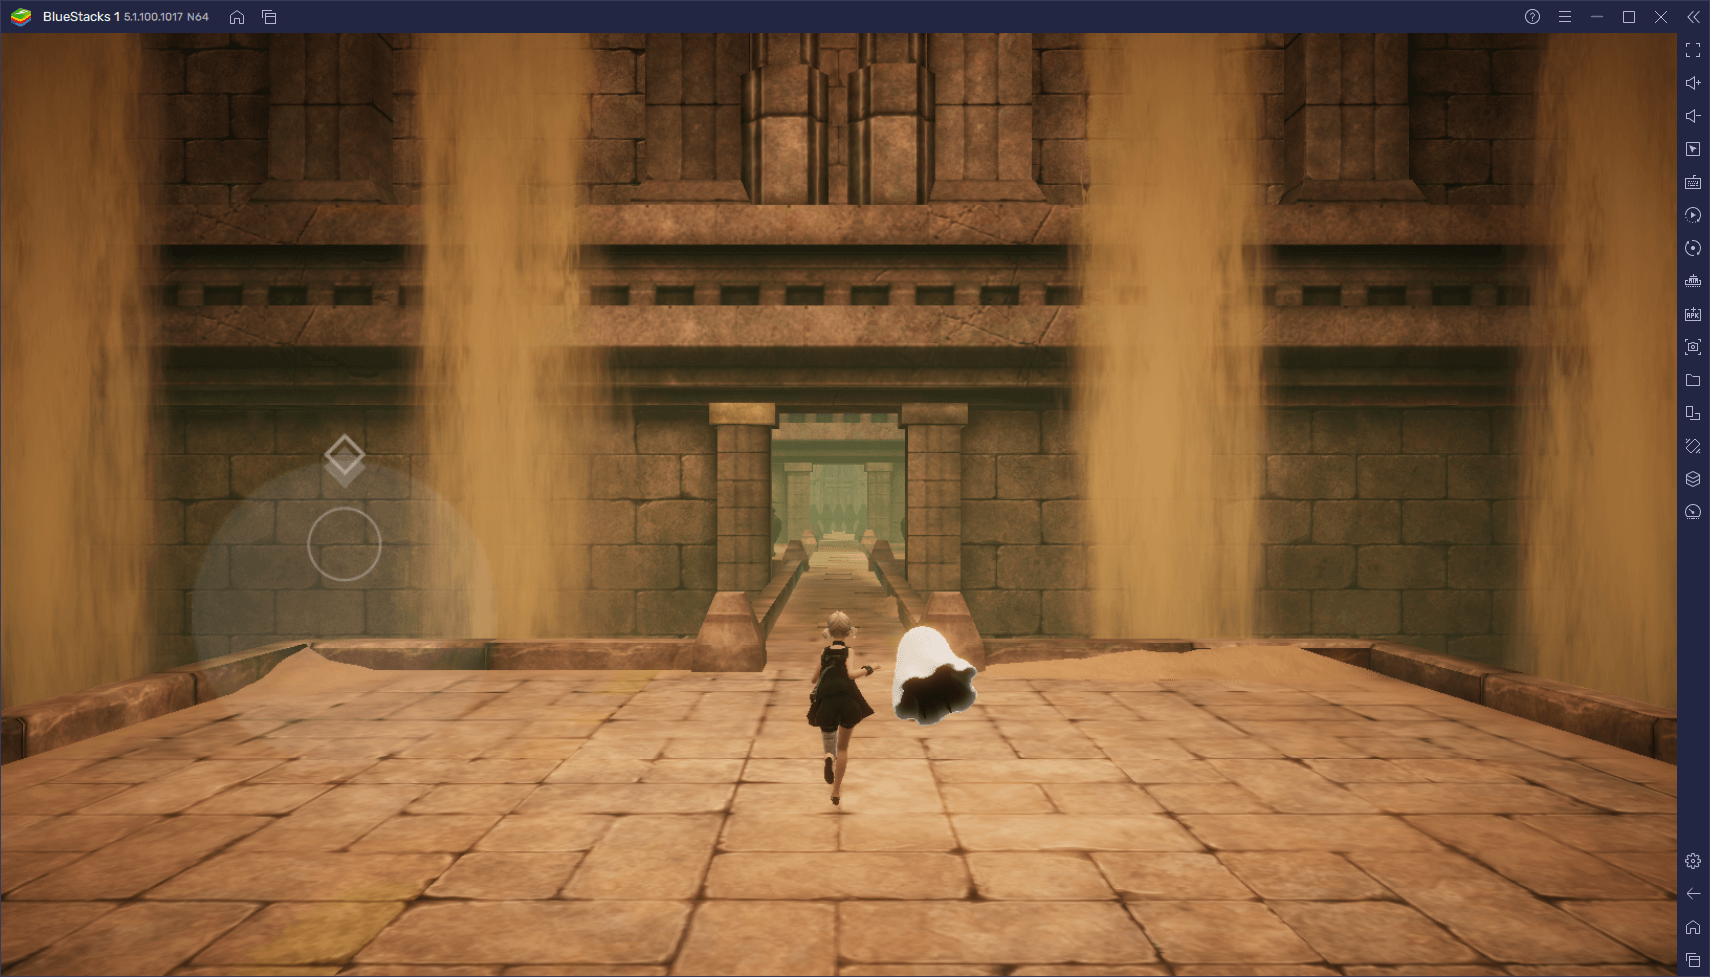 BlueStacks Guide for NieR Reincarnation - Enjoy the New Mobile NieR Game on PC With Our Exclusive Features and Improvements